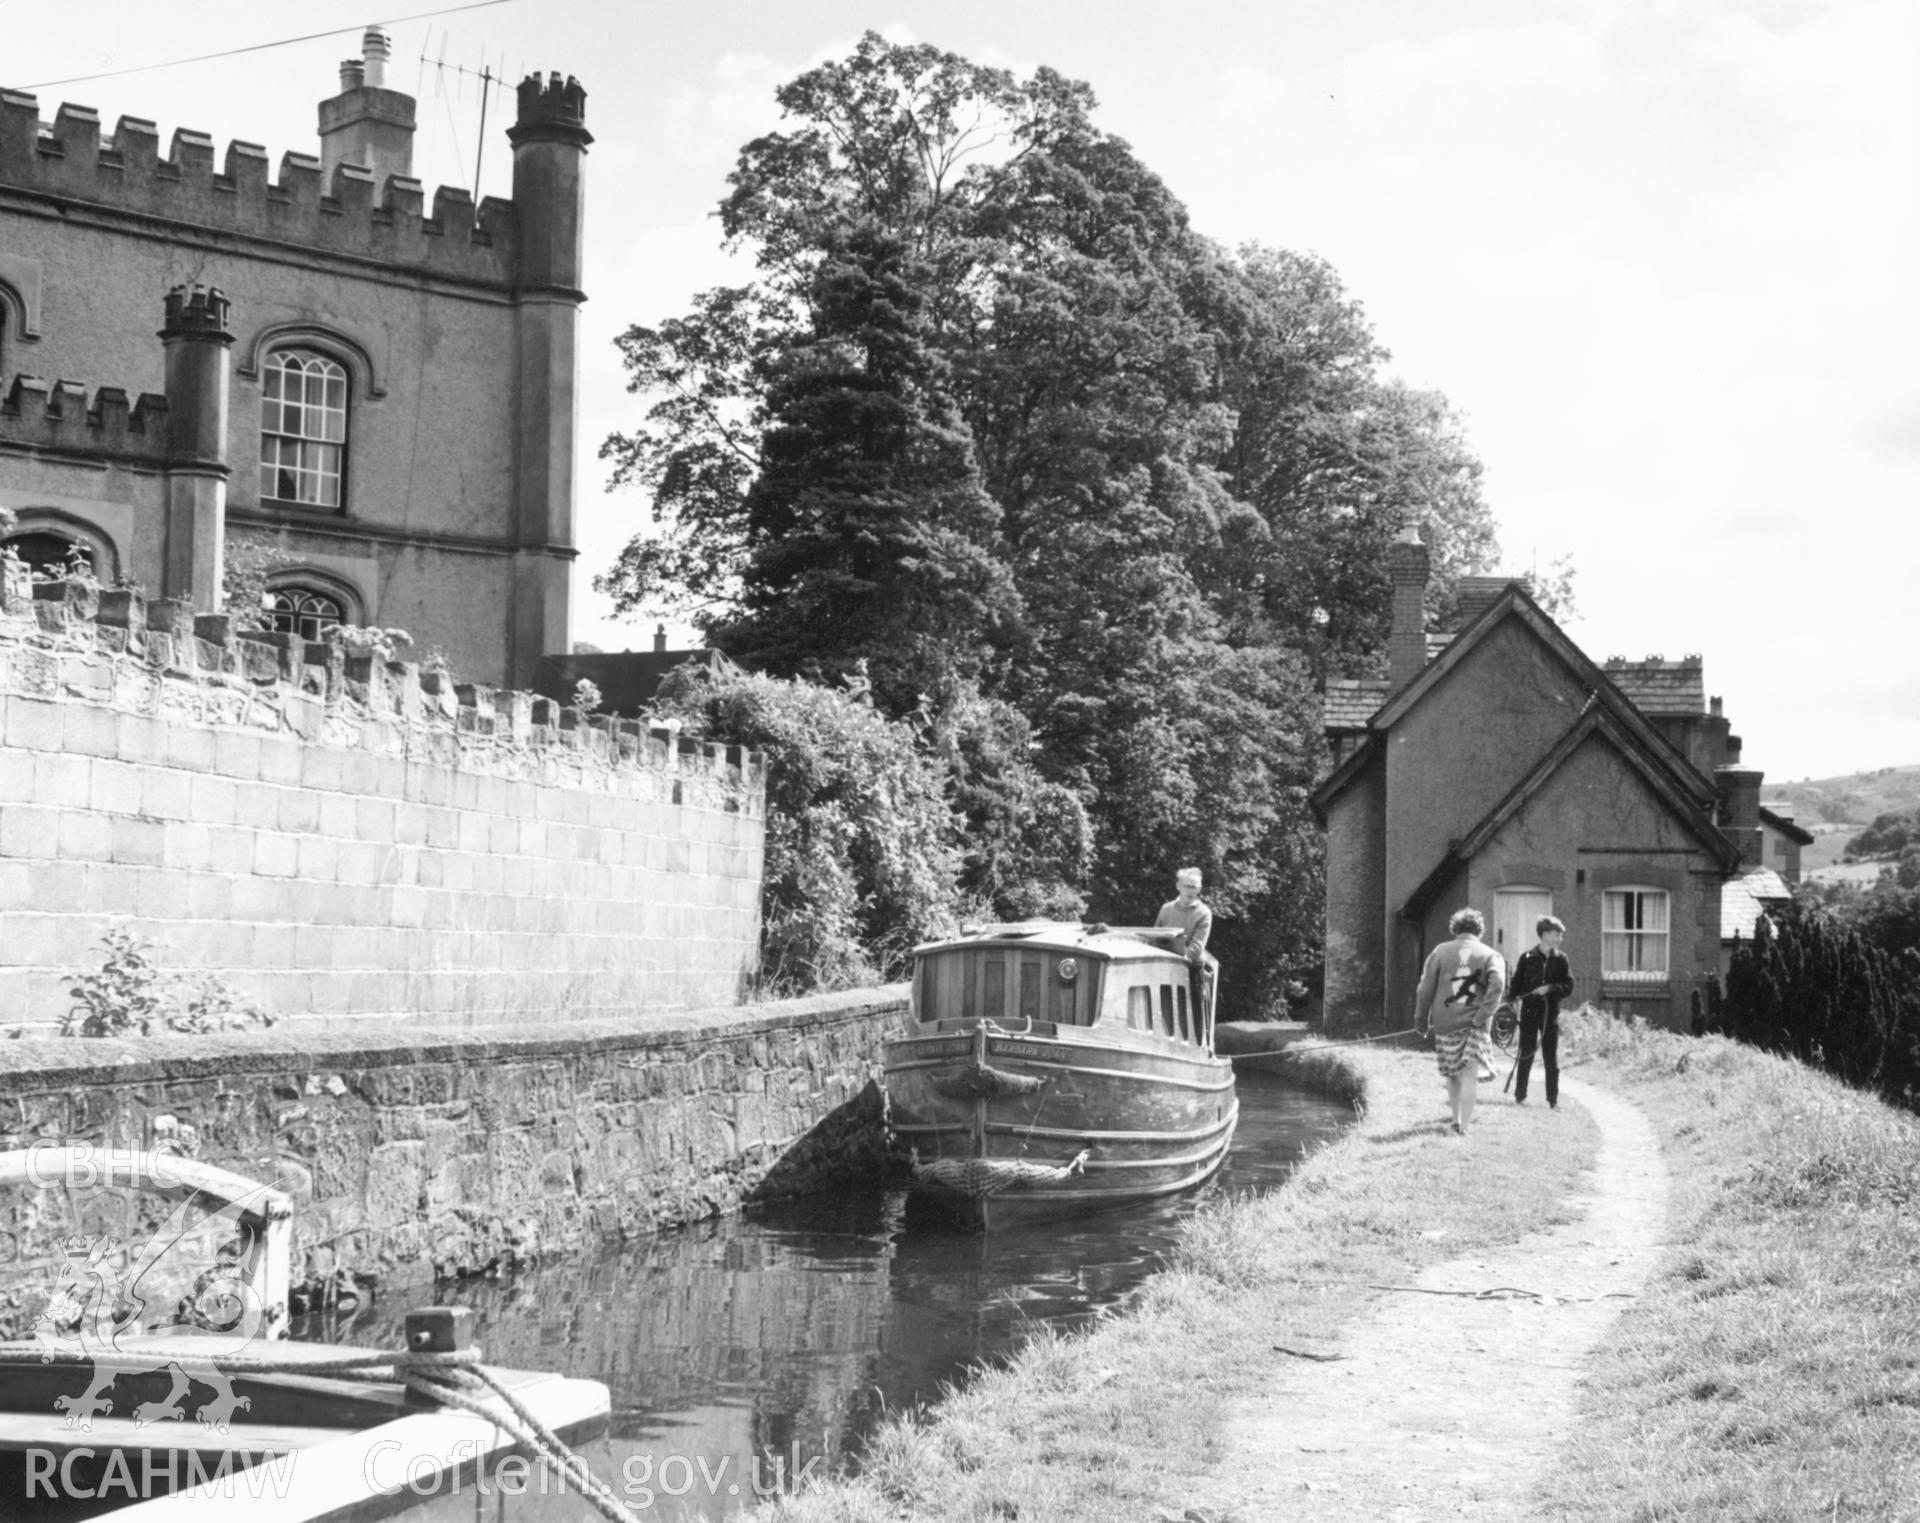 1 b/w print showing boats and 3 figures on Llangollen Canal; collated by the former Central Office of Information.